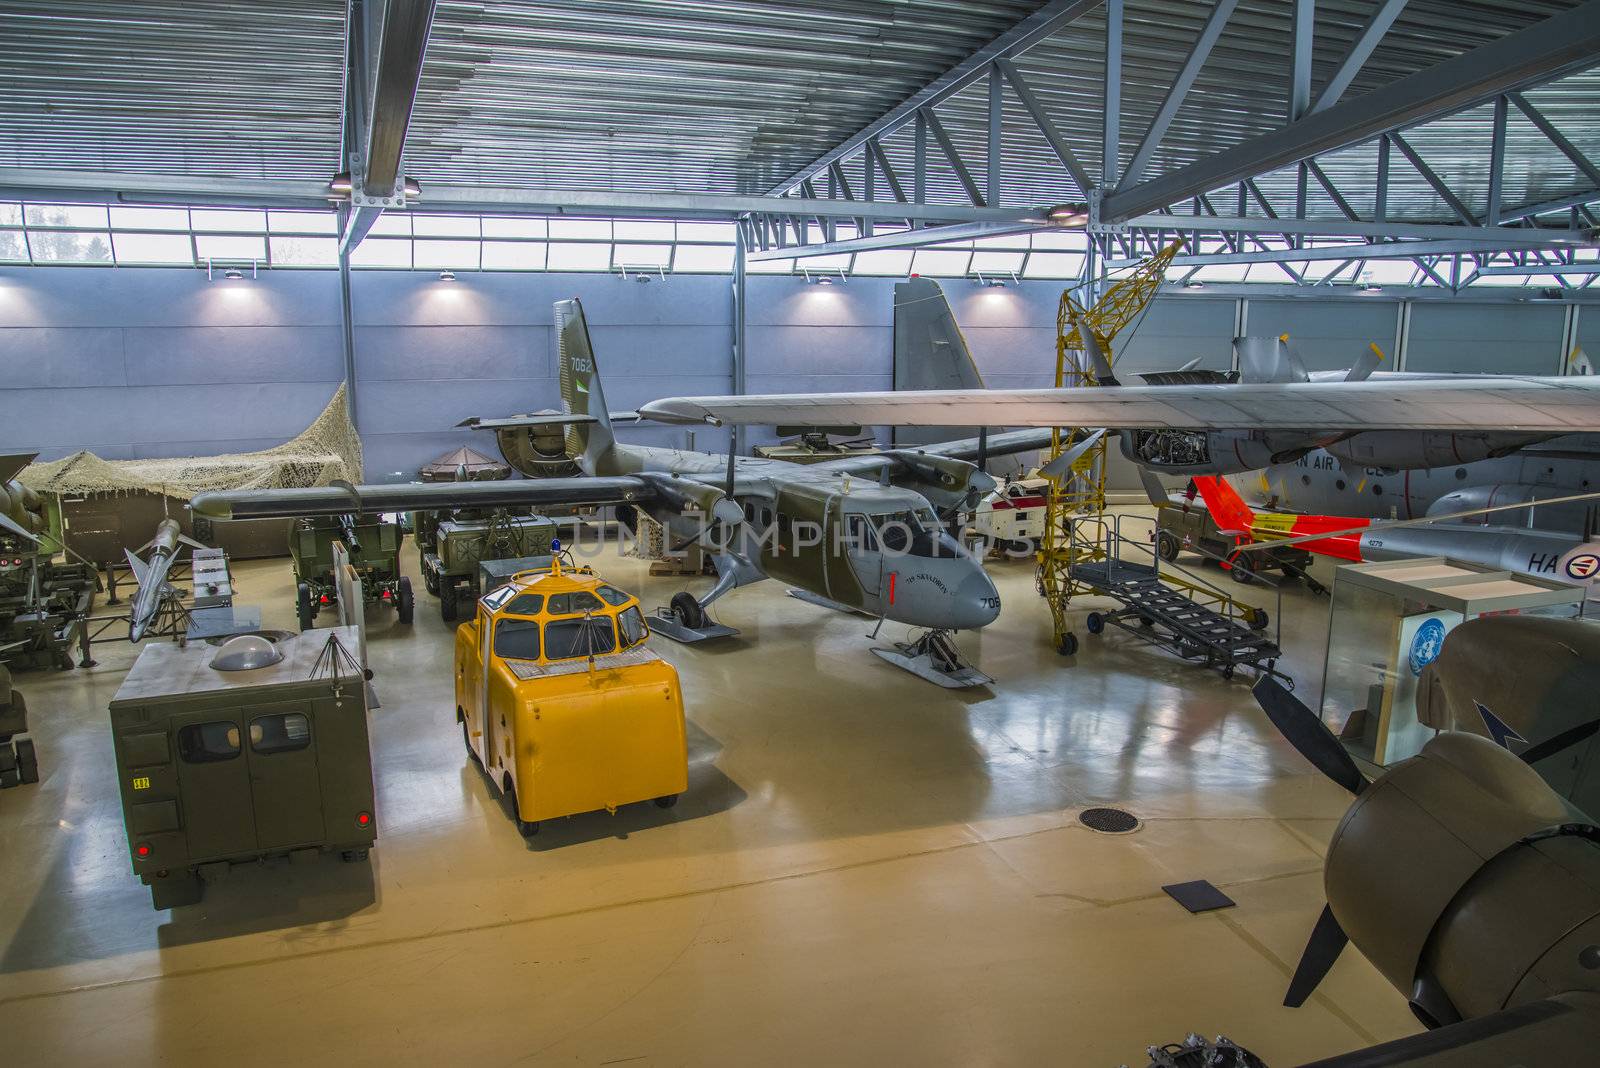 mobile radar and tracking systems for nike missiles was used to search and locate the enemy targets, the pictures are shot in march 2013 by norwegian armed forces aircraft collection which is a military aviation museum located at gardermoen, north of oslo, norway.